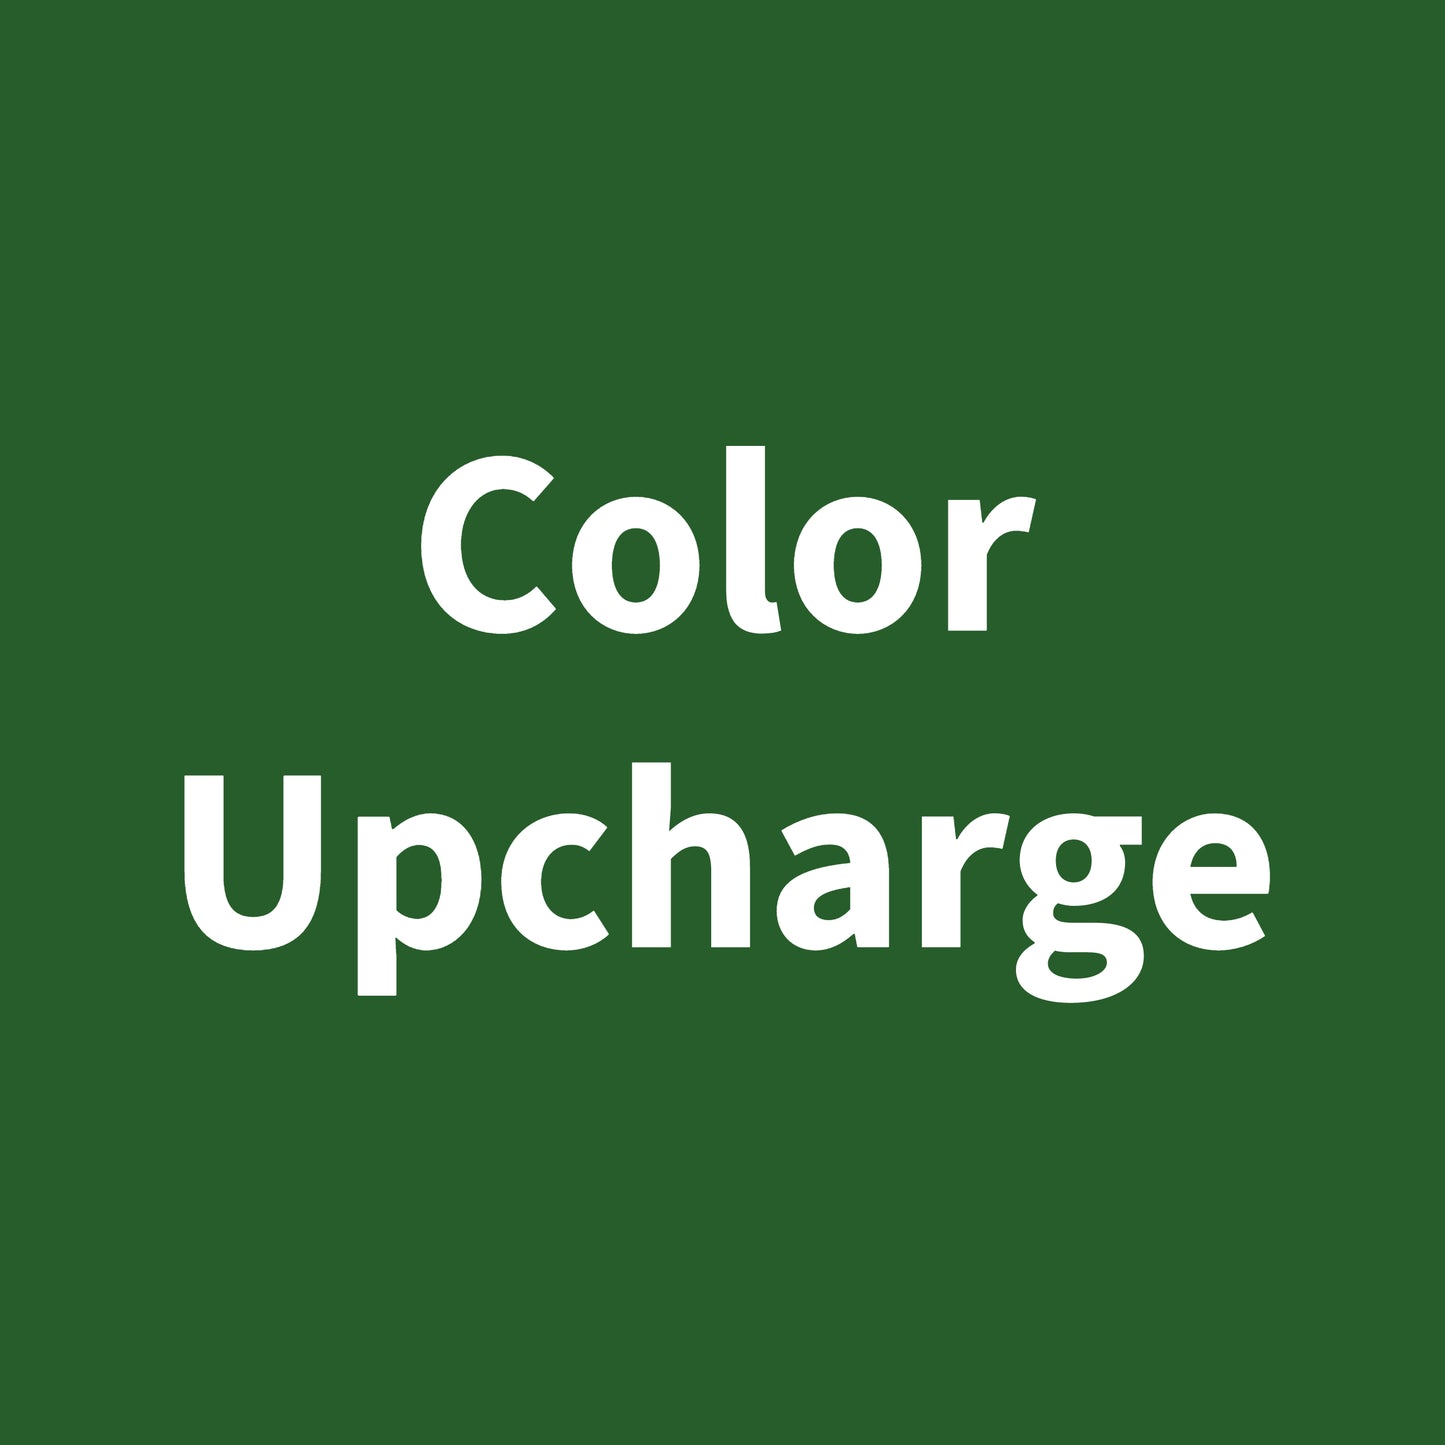 Color Upcharge